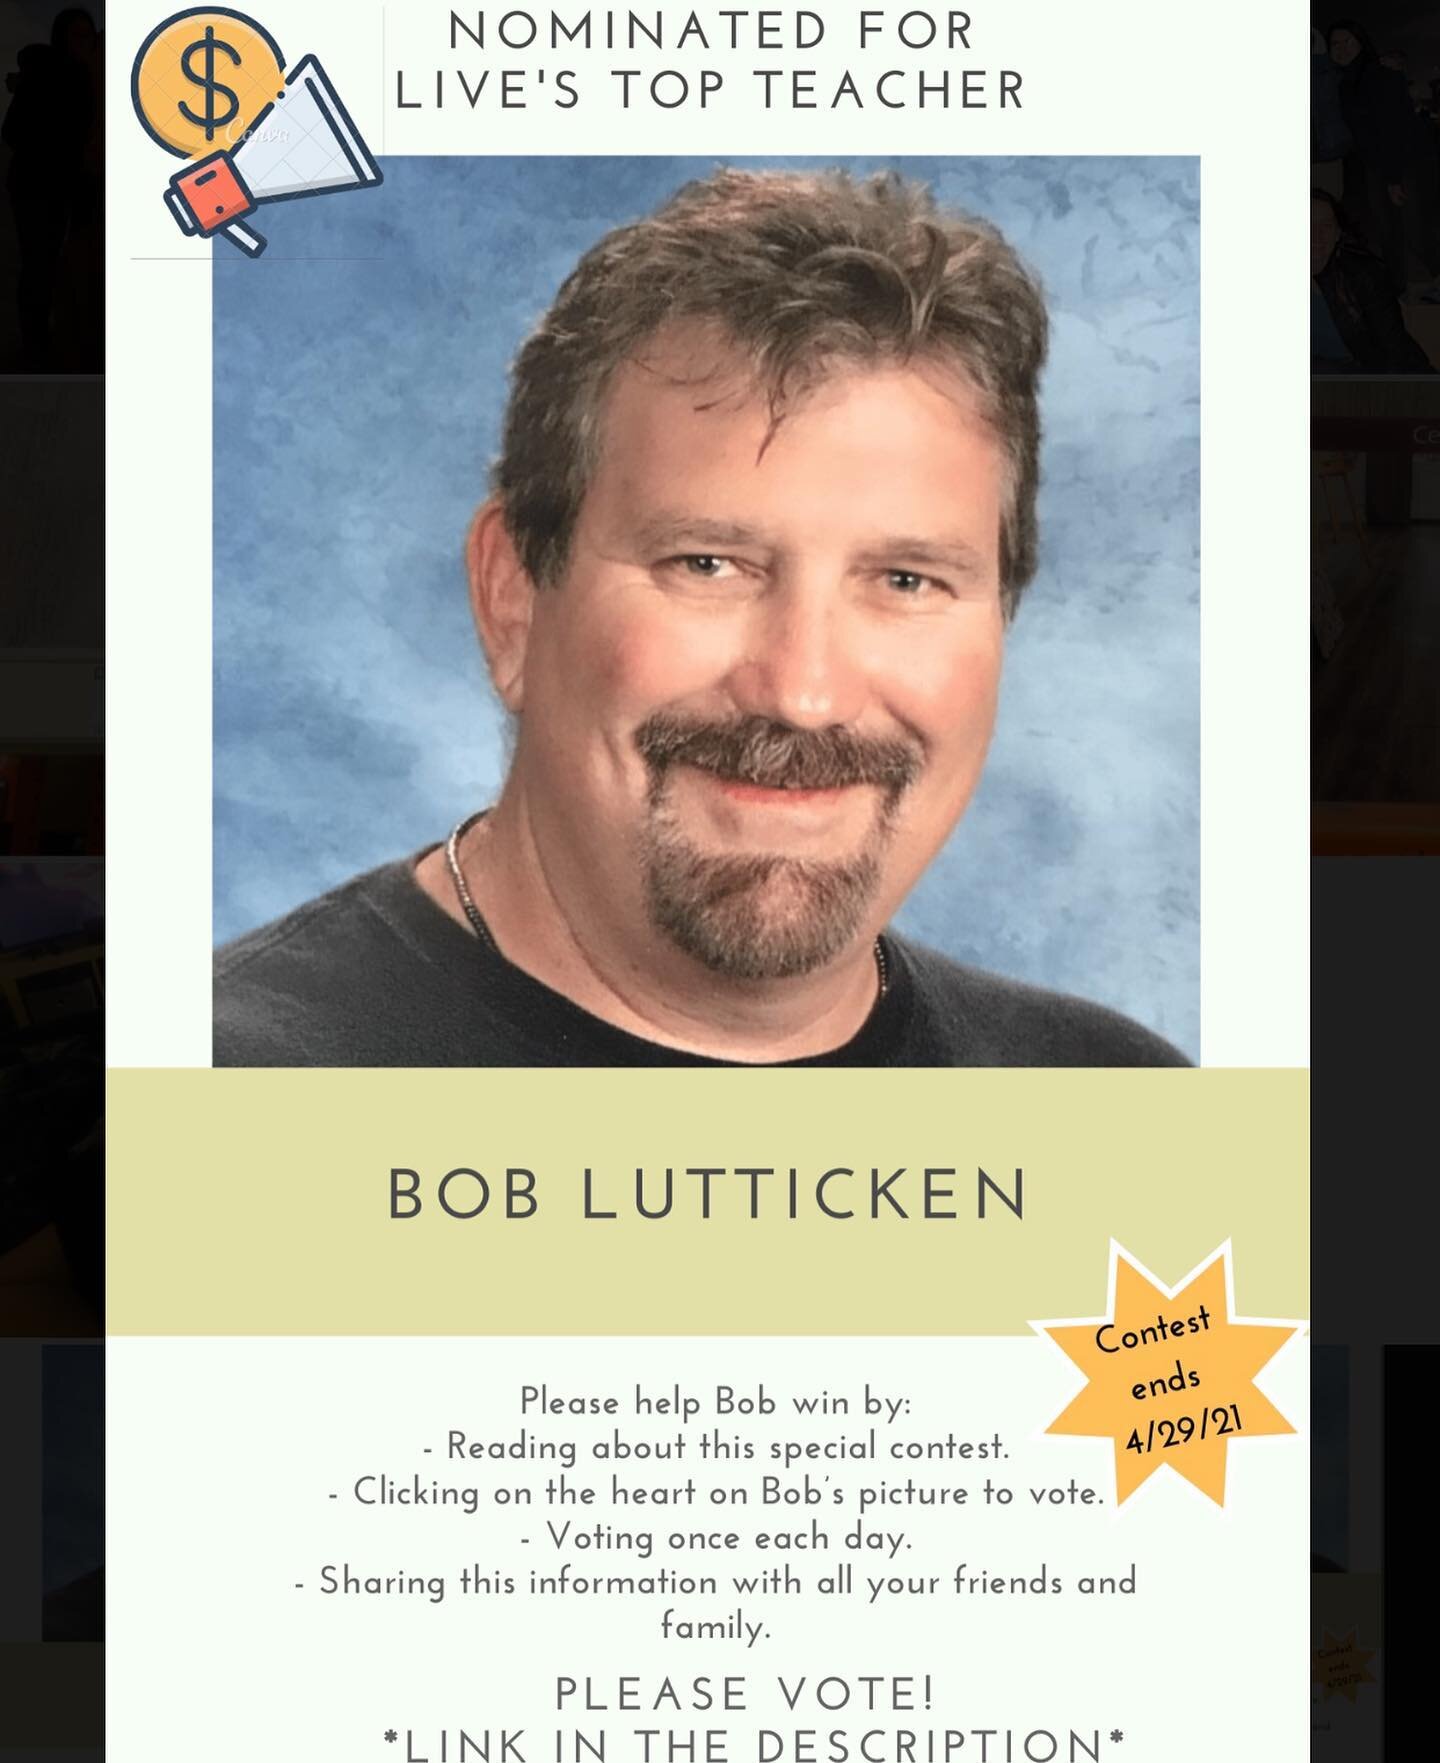 ‼️ ATTENTION ‼️

Bob Lutticken has been nominated as TOP TEACHER in a special contest! Please help him win the opportunity to receive $10,000 in teacher project funding for Abraxas High School! 

Contest ends this THURSDAY 4/29. Please use the follow